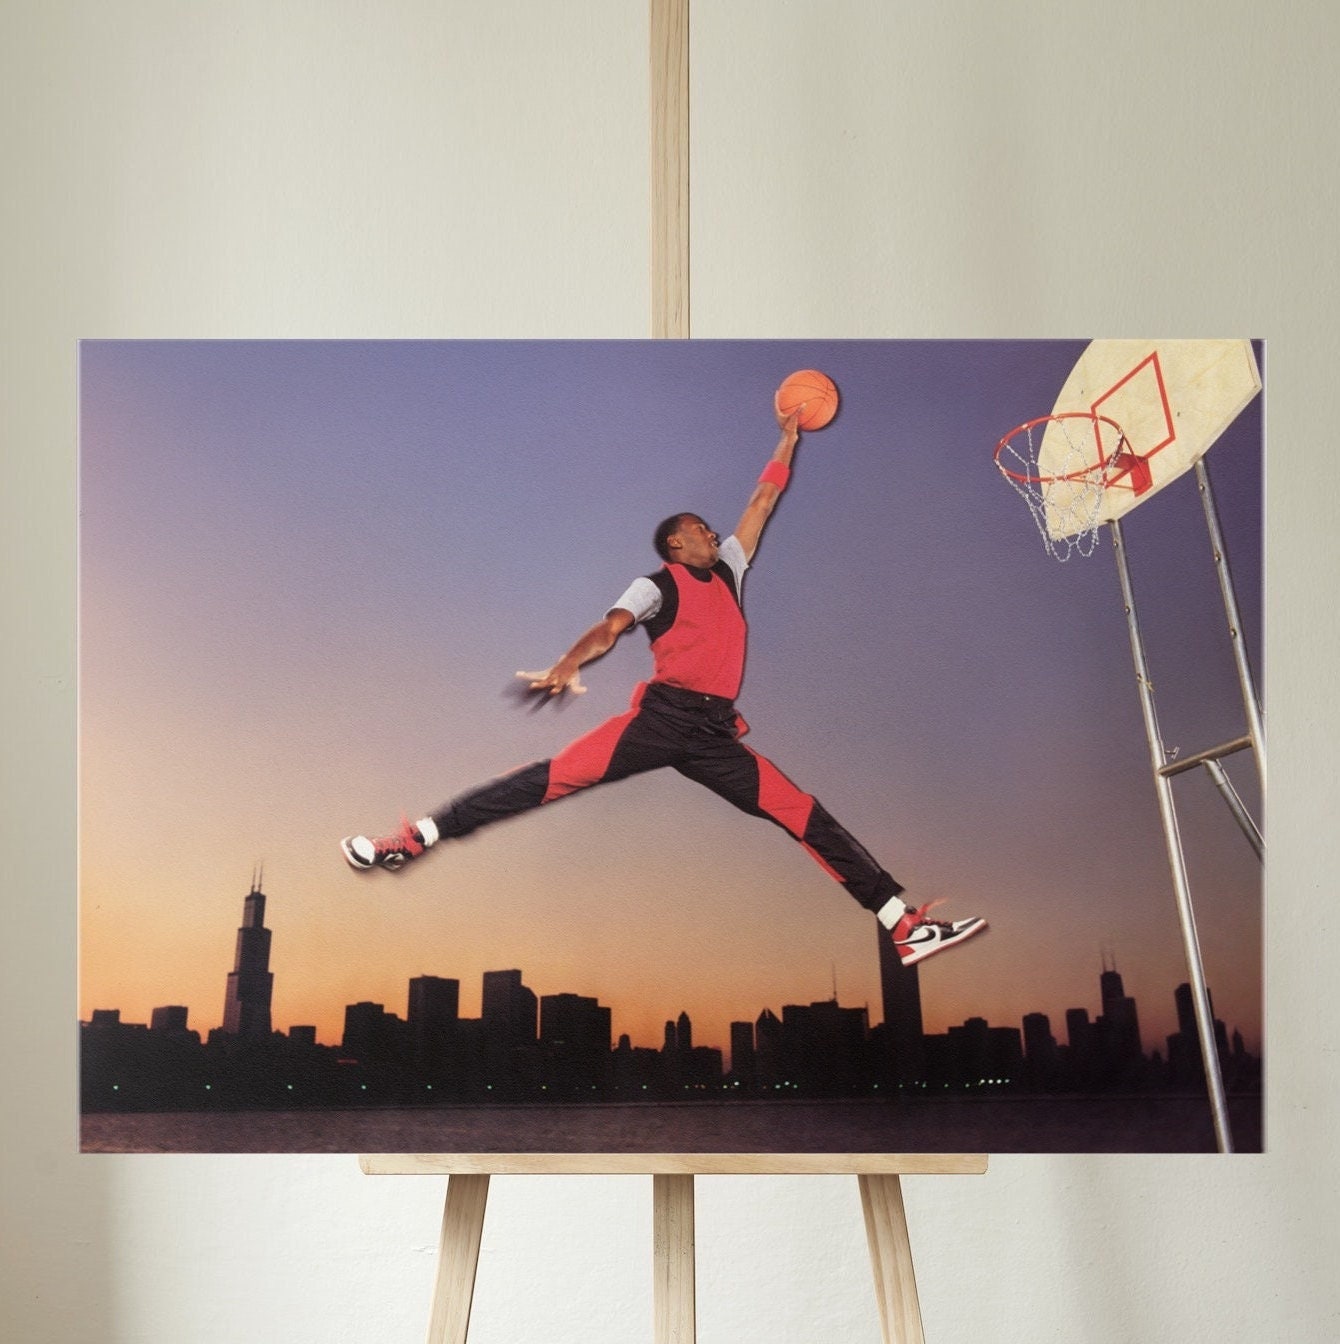 Jumpman: The Making and Meaning of Michael Jordan